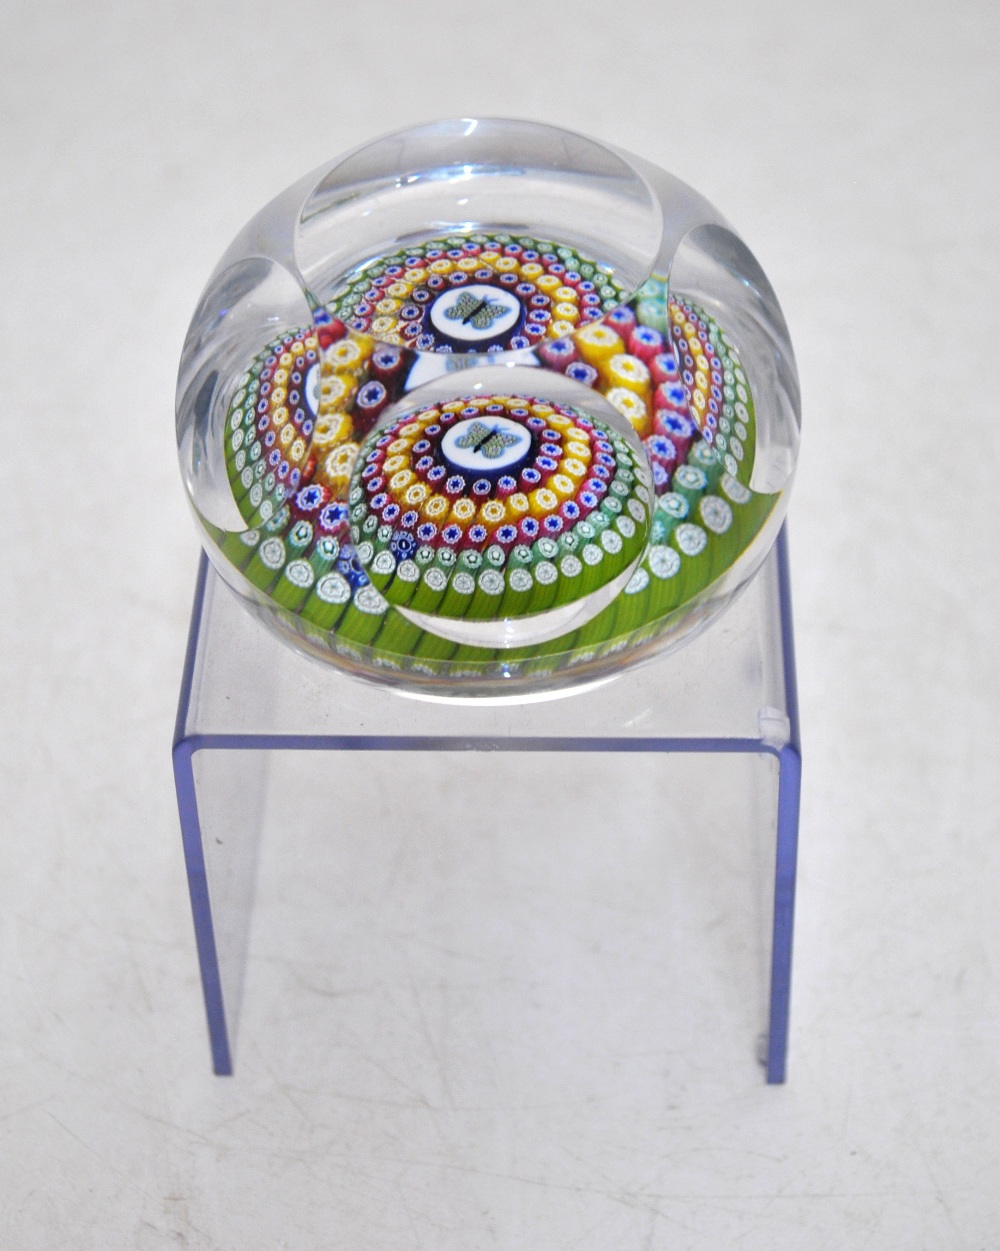 A faceted glass paperweight decorated with a central butterfly cane and concentric bands of canes in - Image 5 of 8